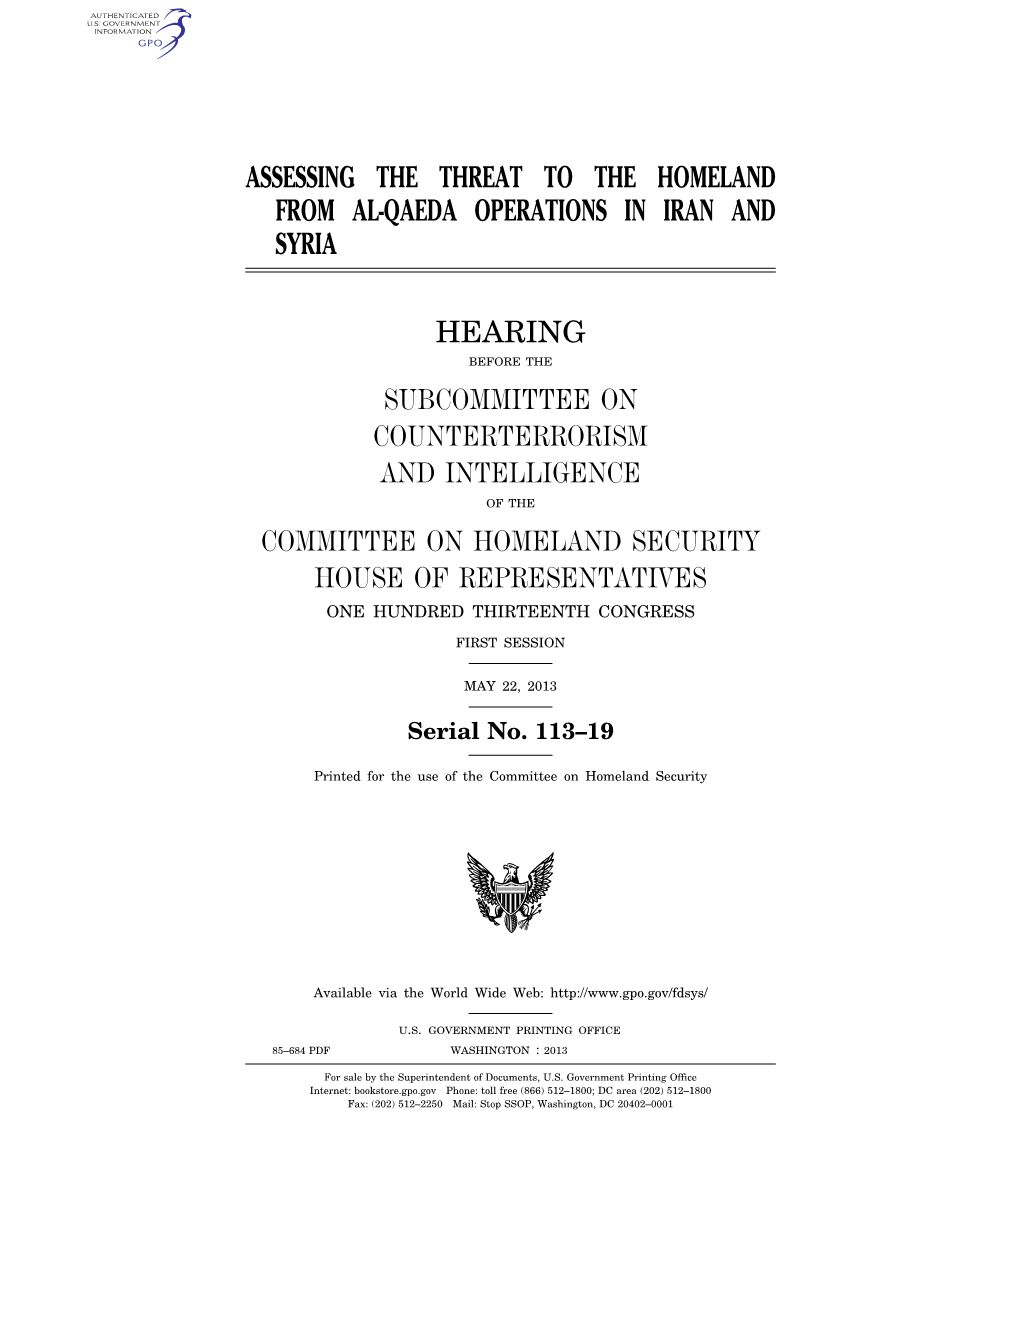 Assessing the Threat to the Homeland from Al-Qaeda Operations in Iran and Syria Hearing Subcommittee on Counterterrorism And